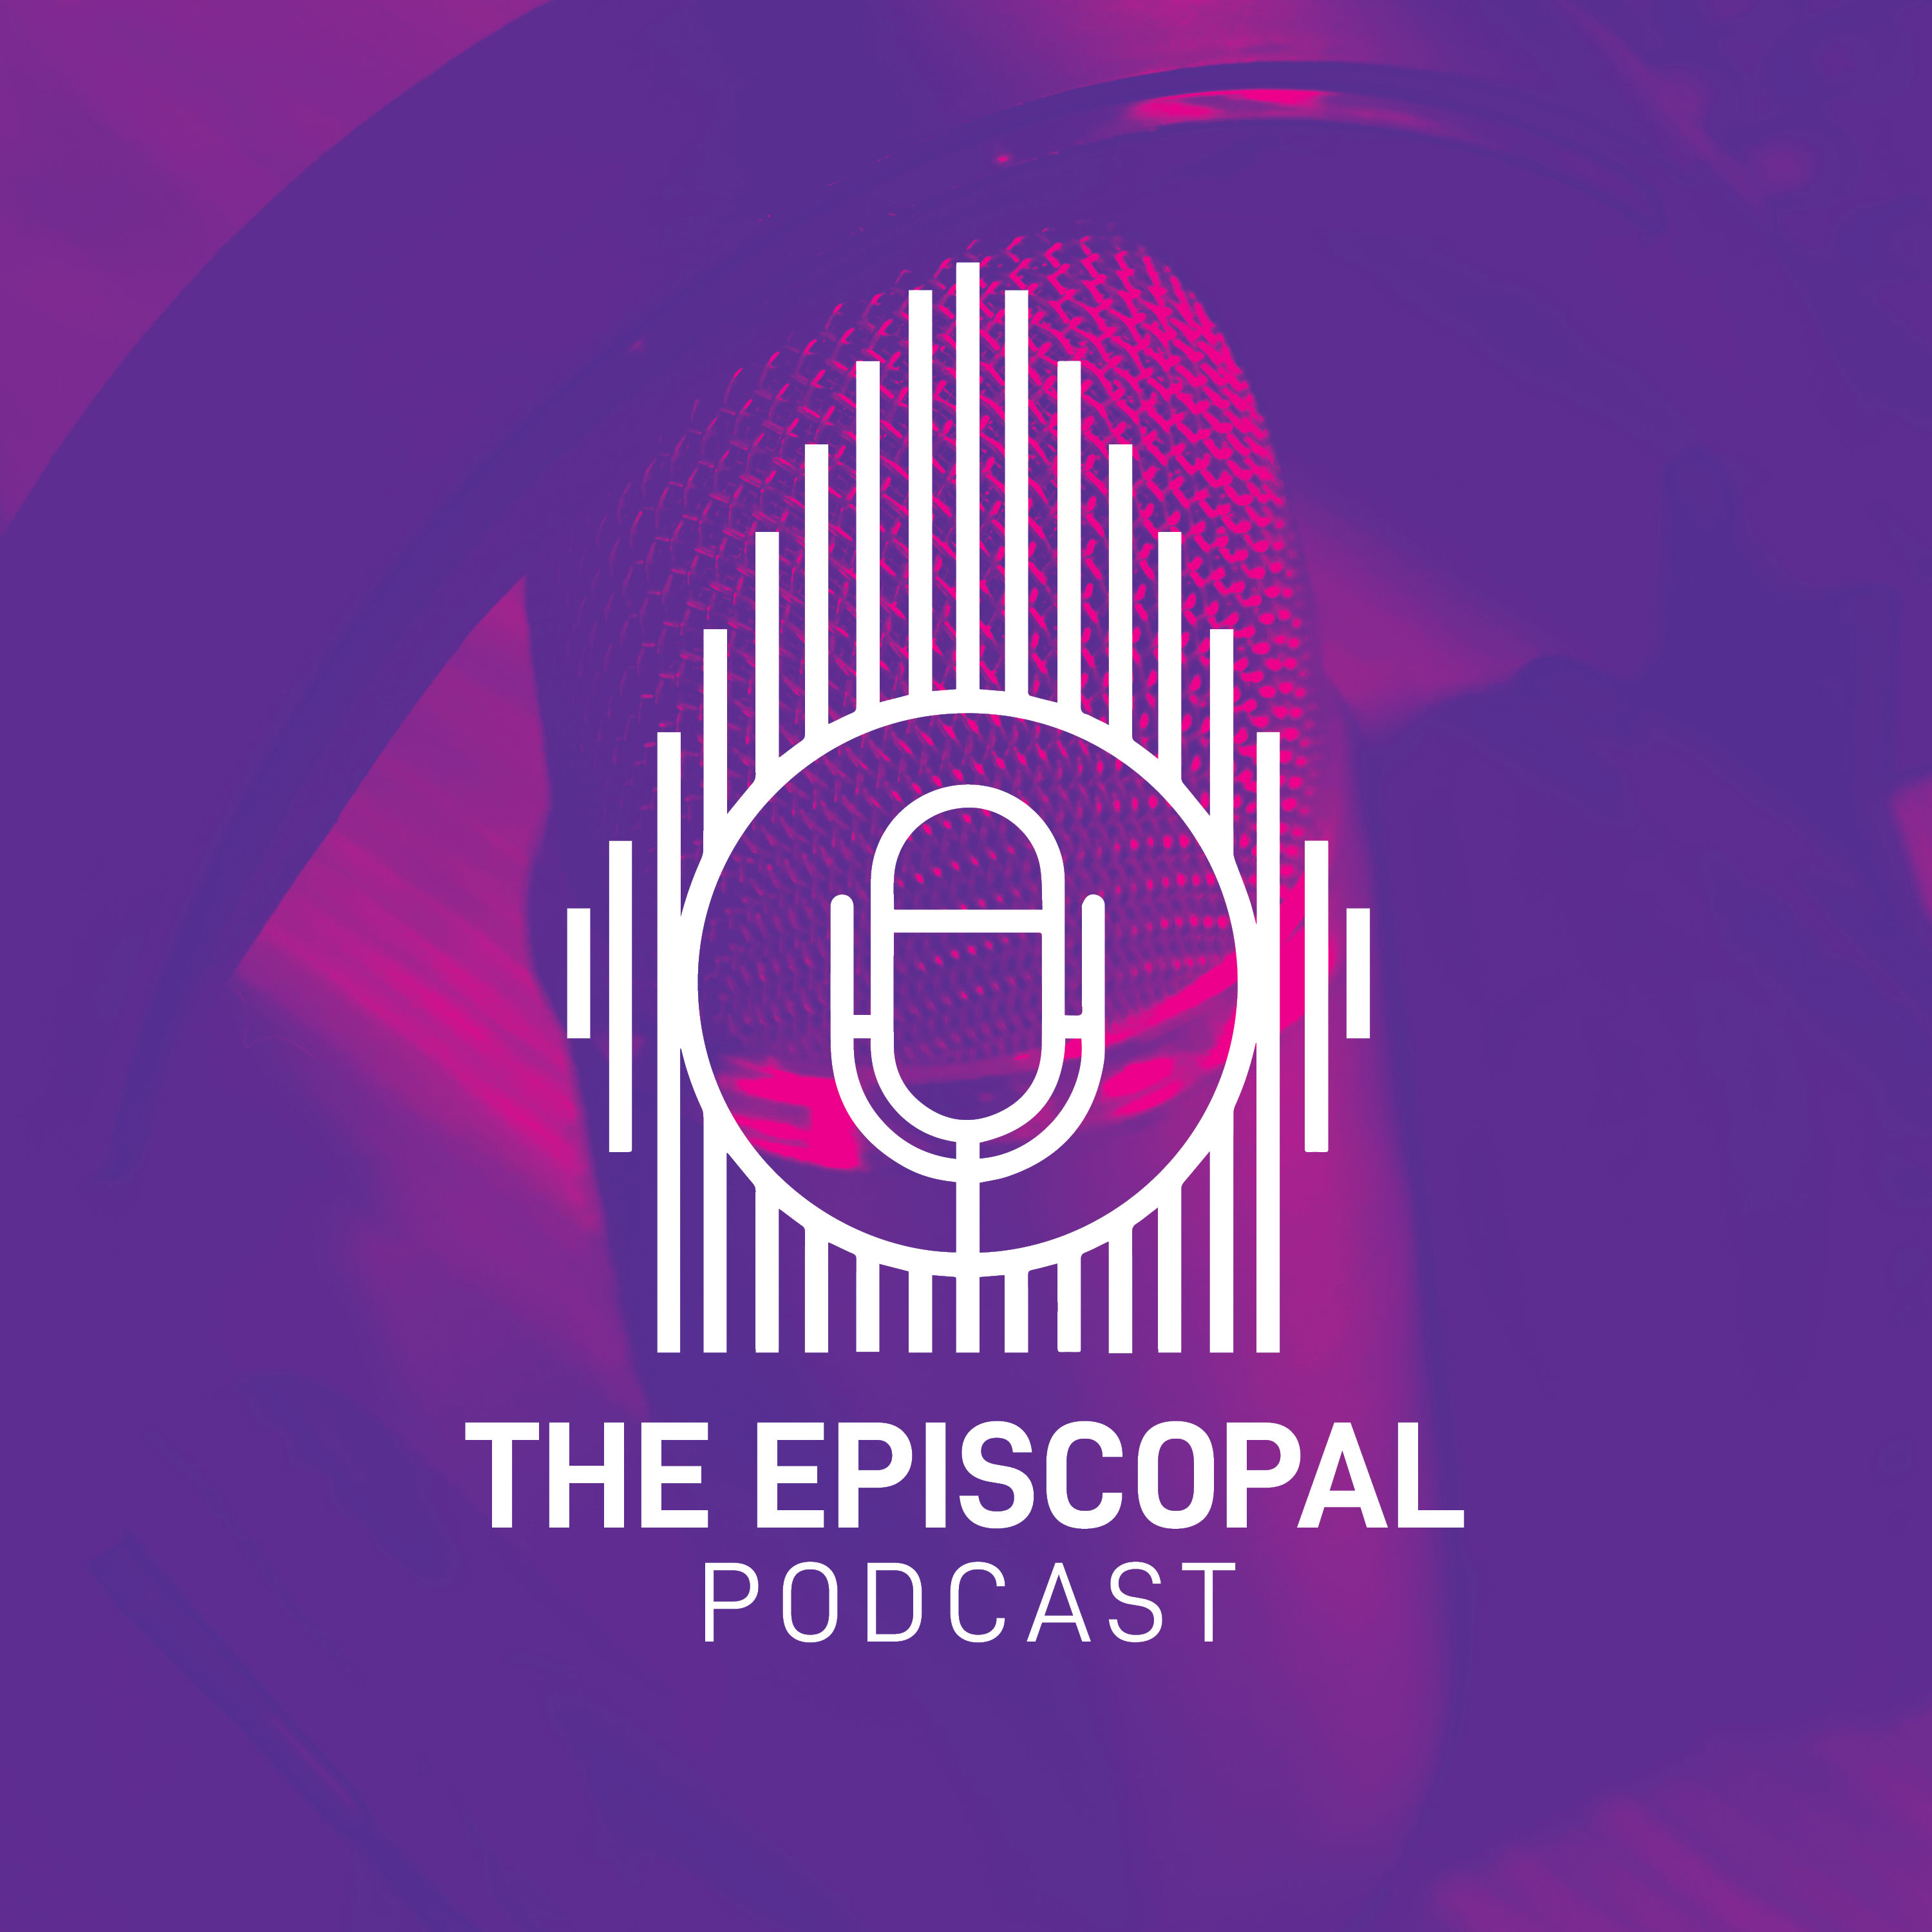 Artwork for podcast The Episcopal Podcast